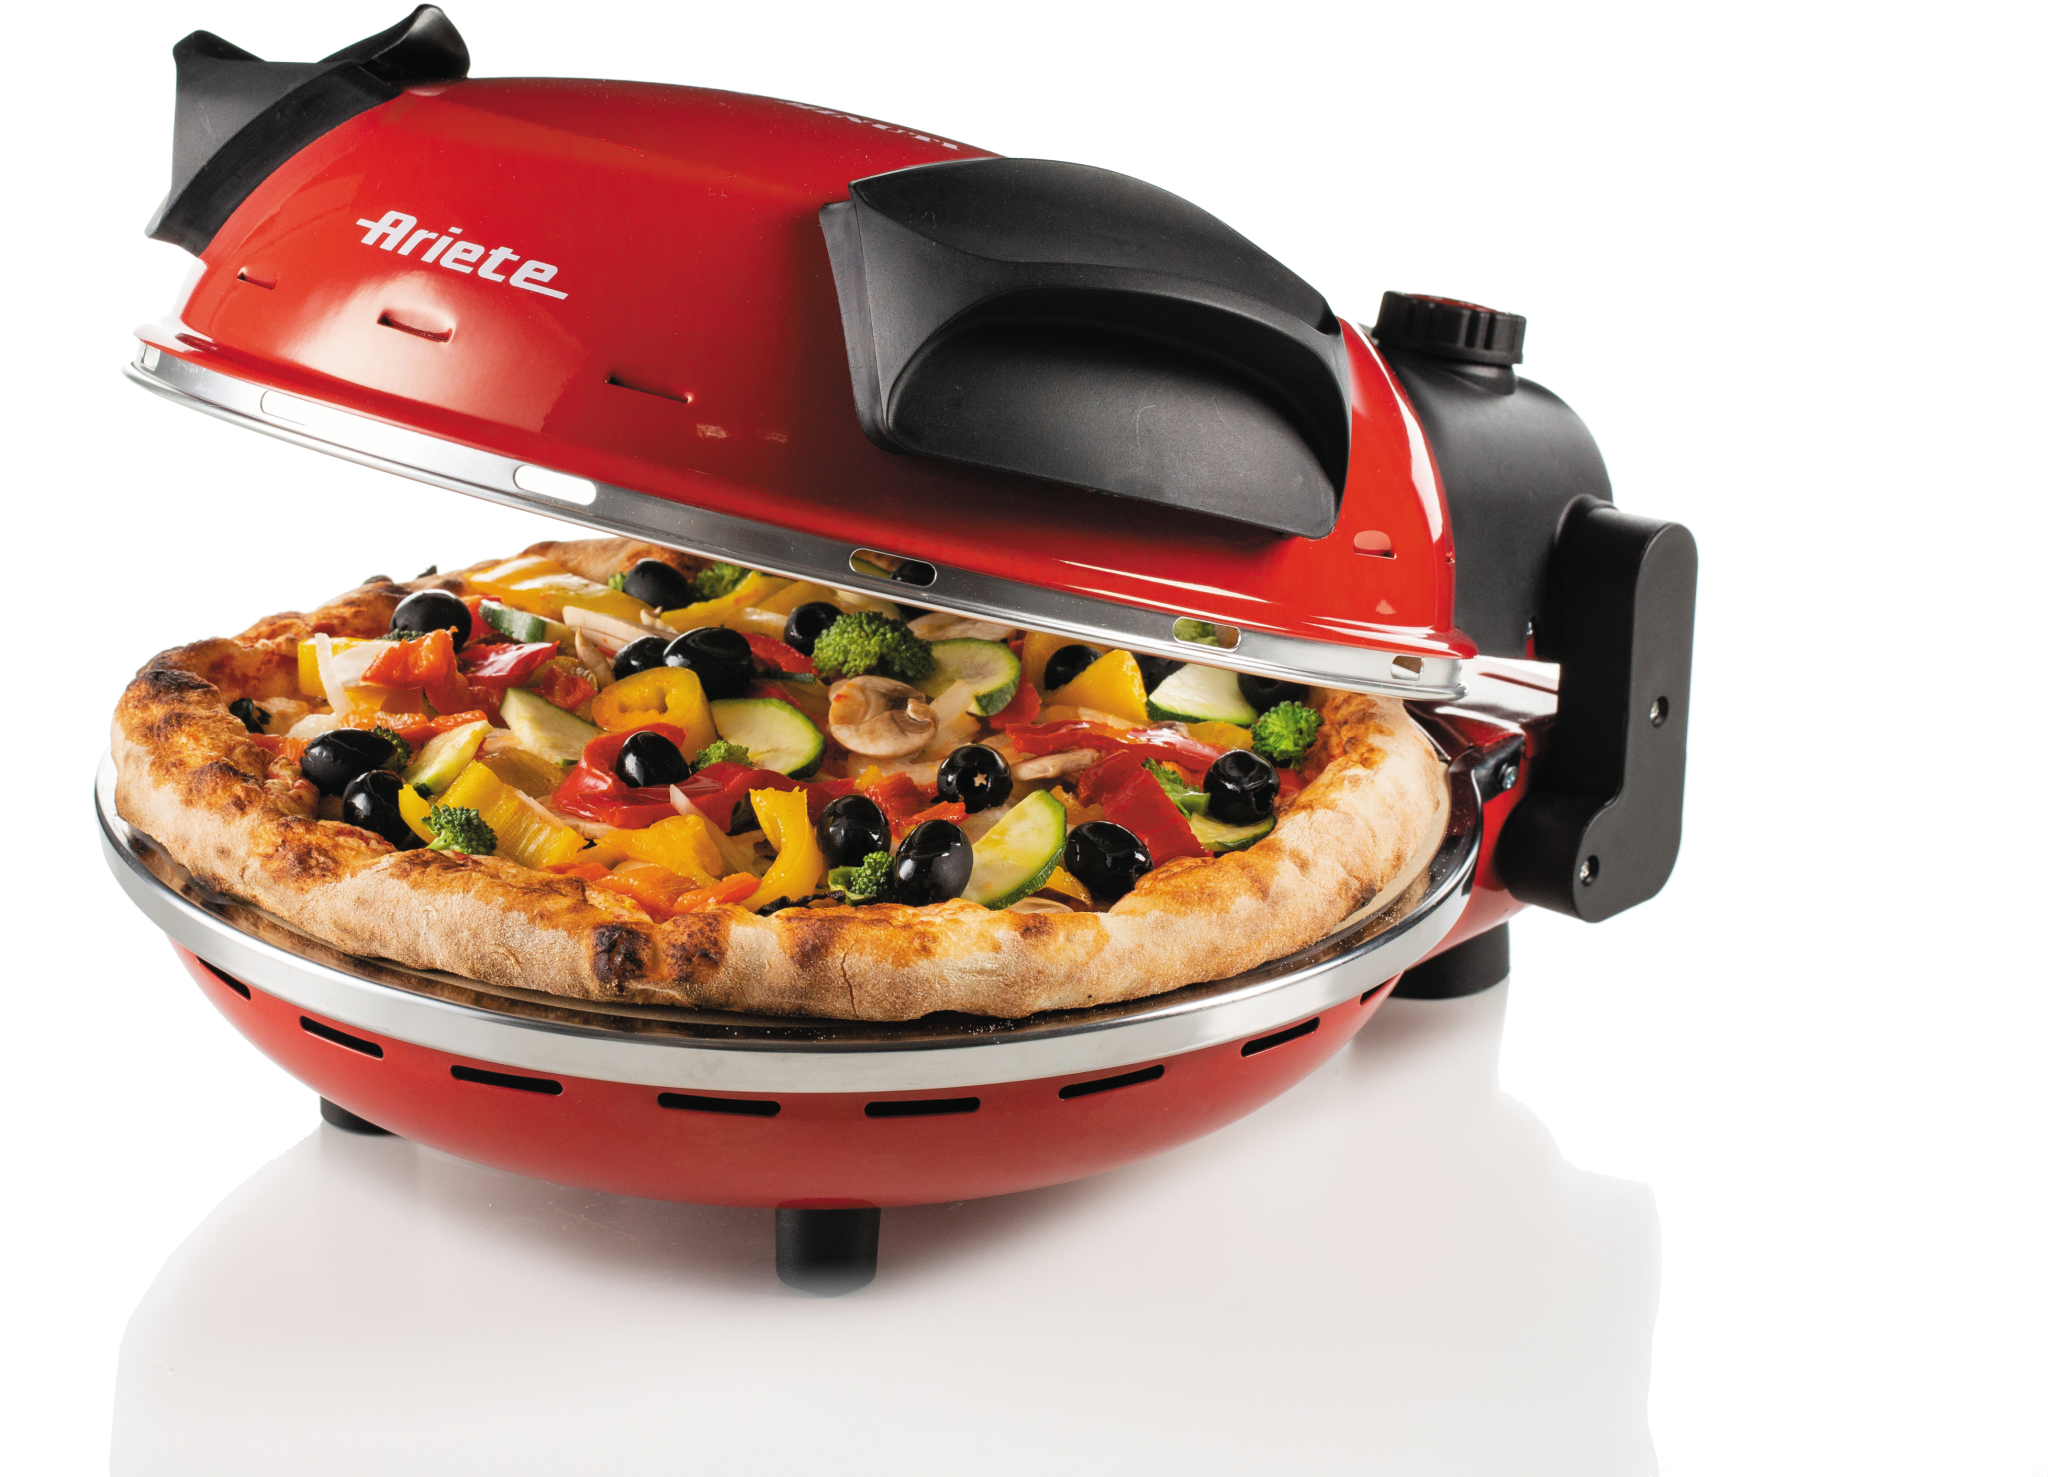 8003705116702 Ariete Electrical Pizza oven, Red - Pizzaovn Husholdning,Madtilberedning,Diverse madtilberedning 74600167020 Electrical Pizza oven, Red